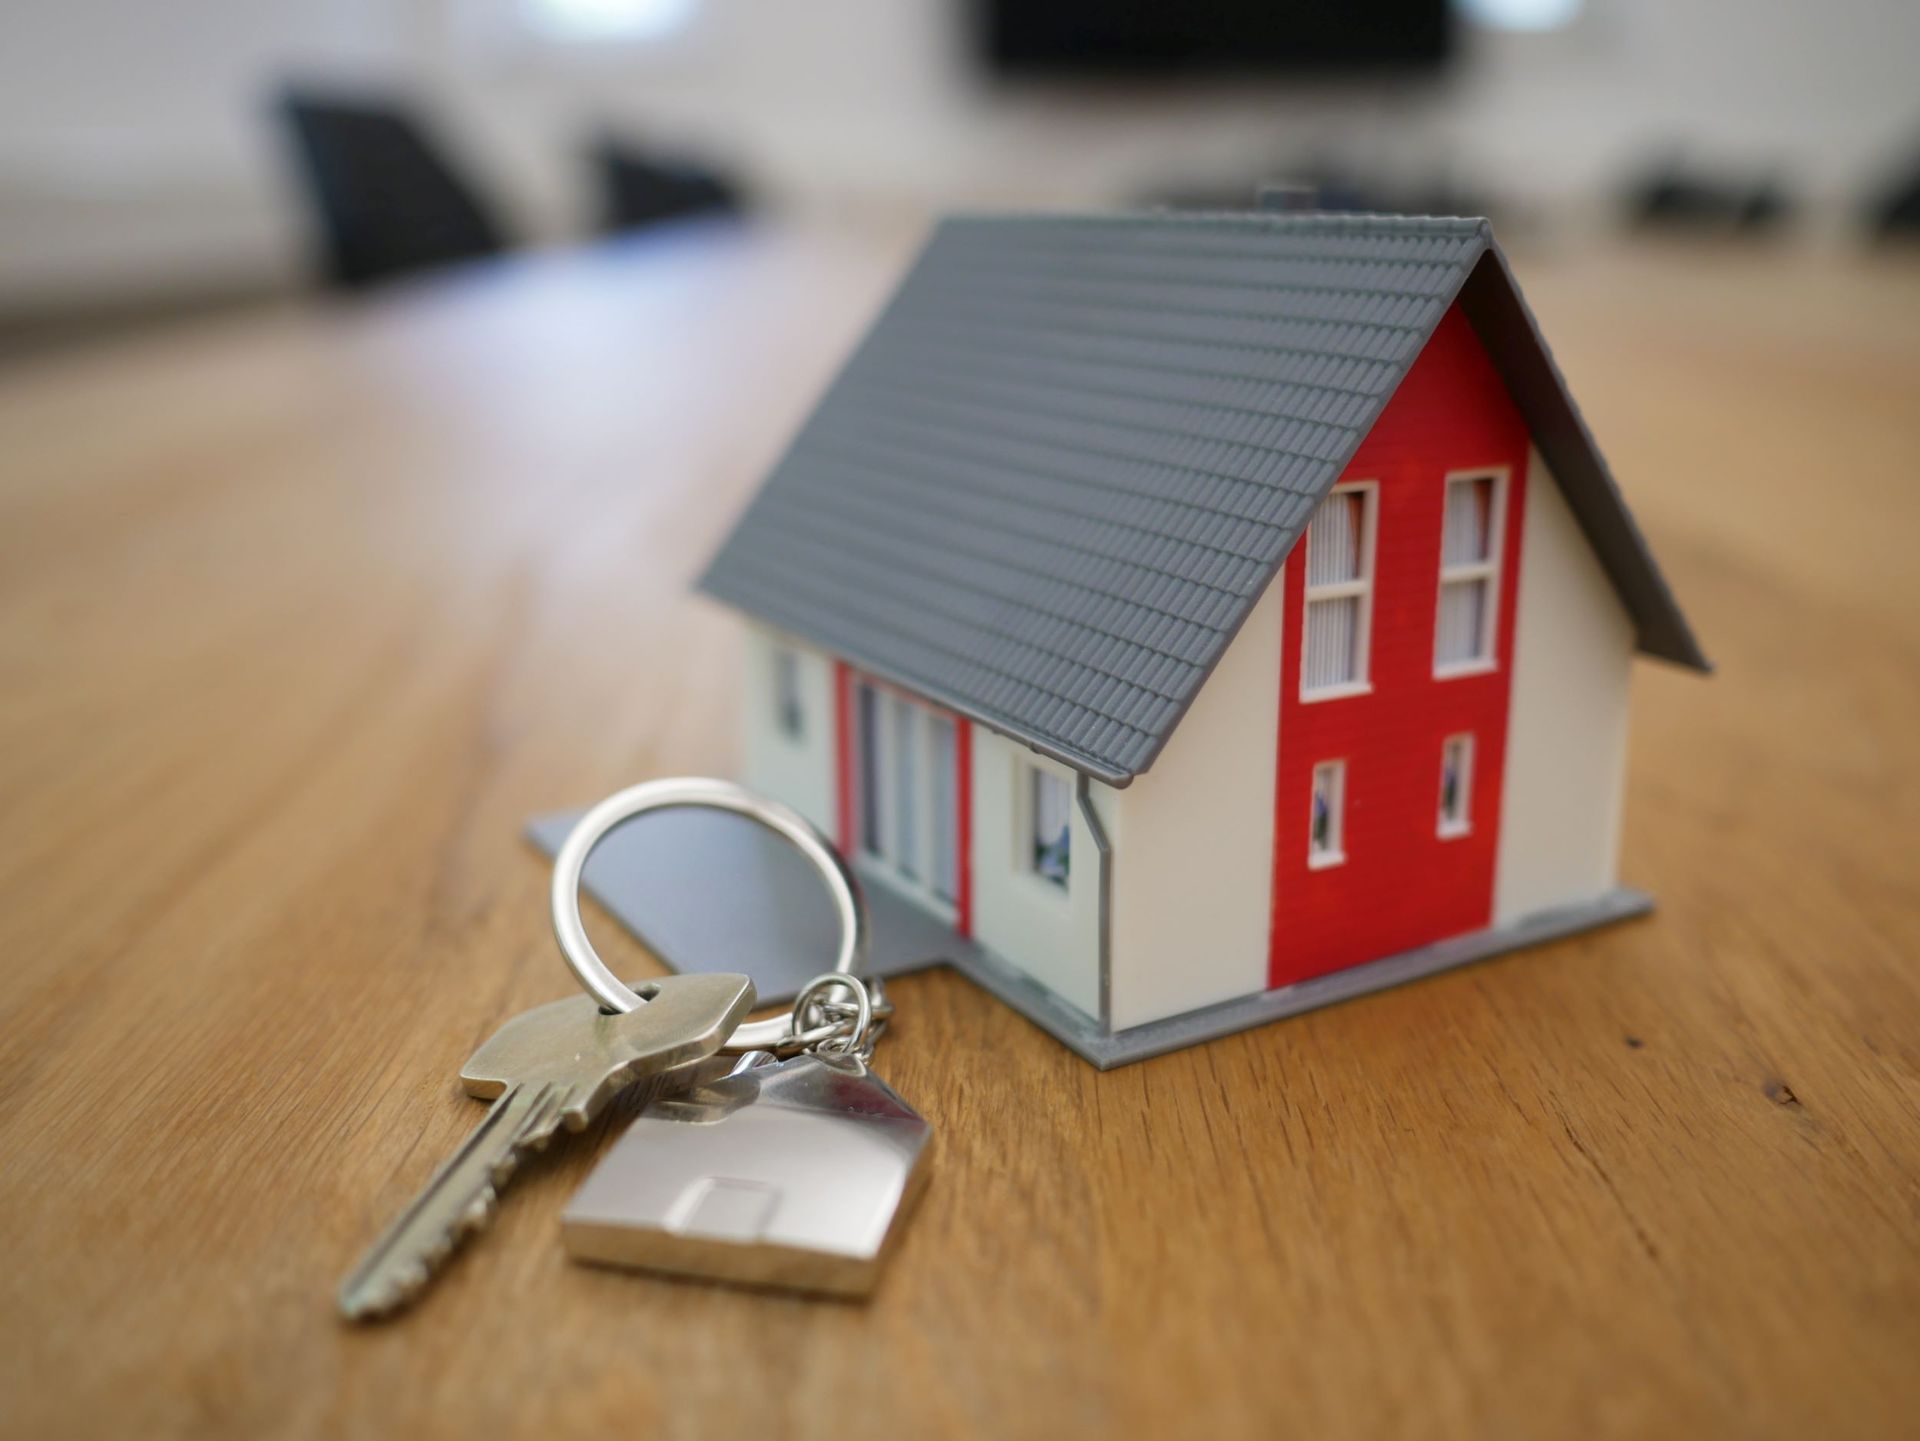 Small House and Keys on Keychain